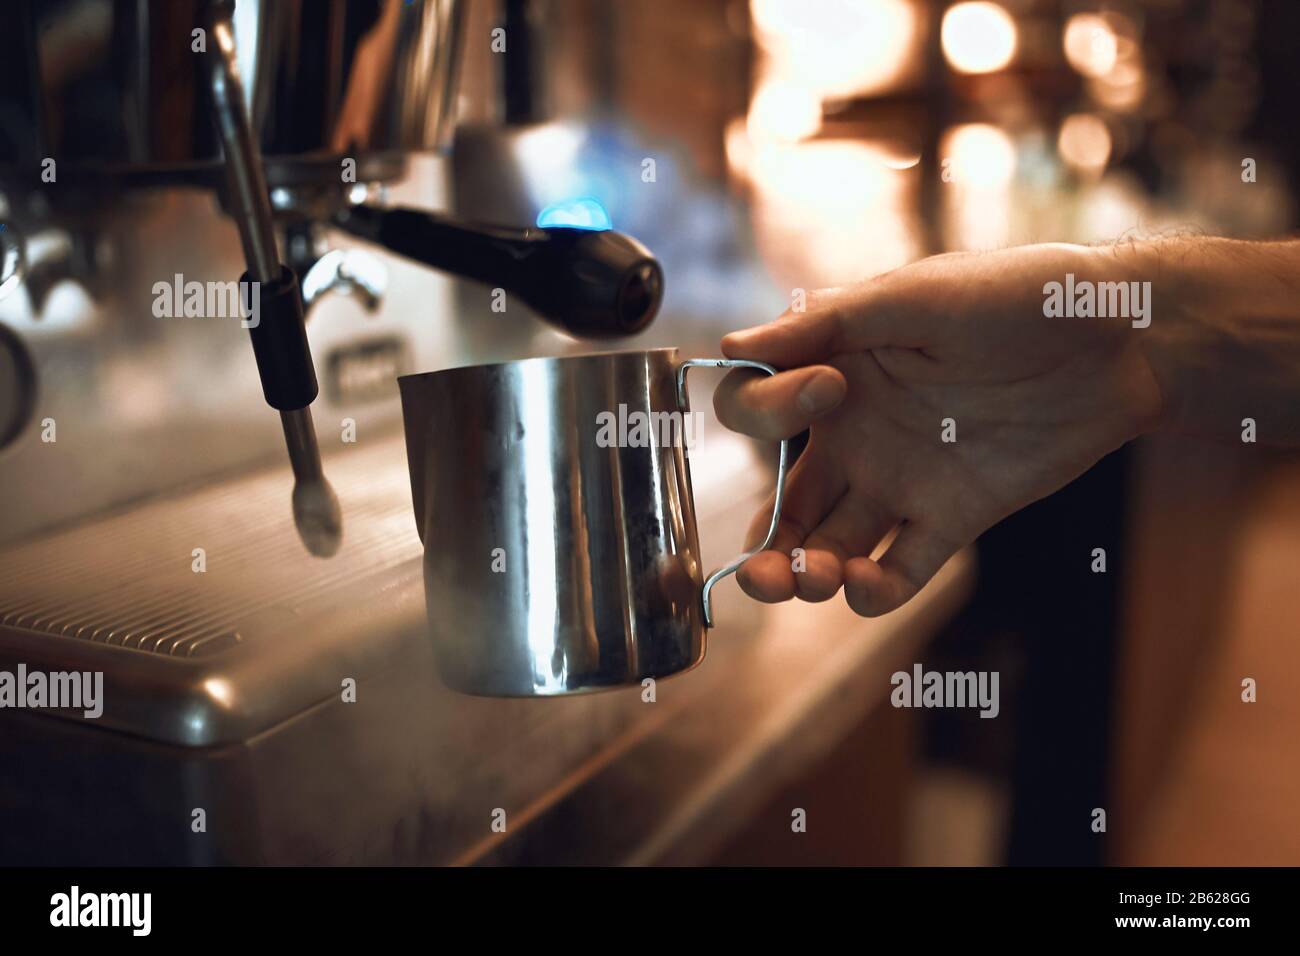 professional barista is holding a cup of milk, standing near a coffee machine, close up side view photo. Stock Photo